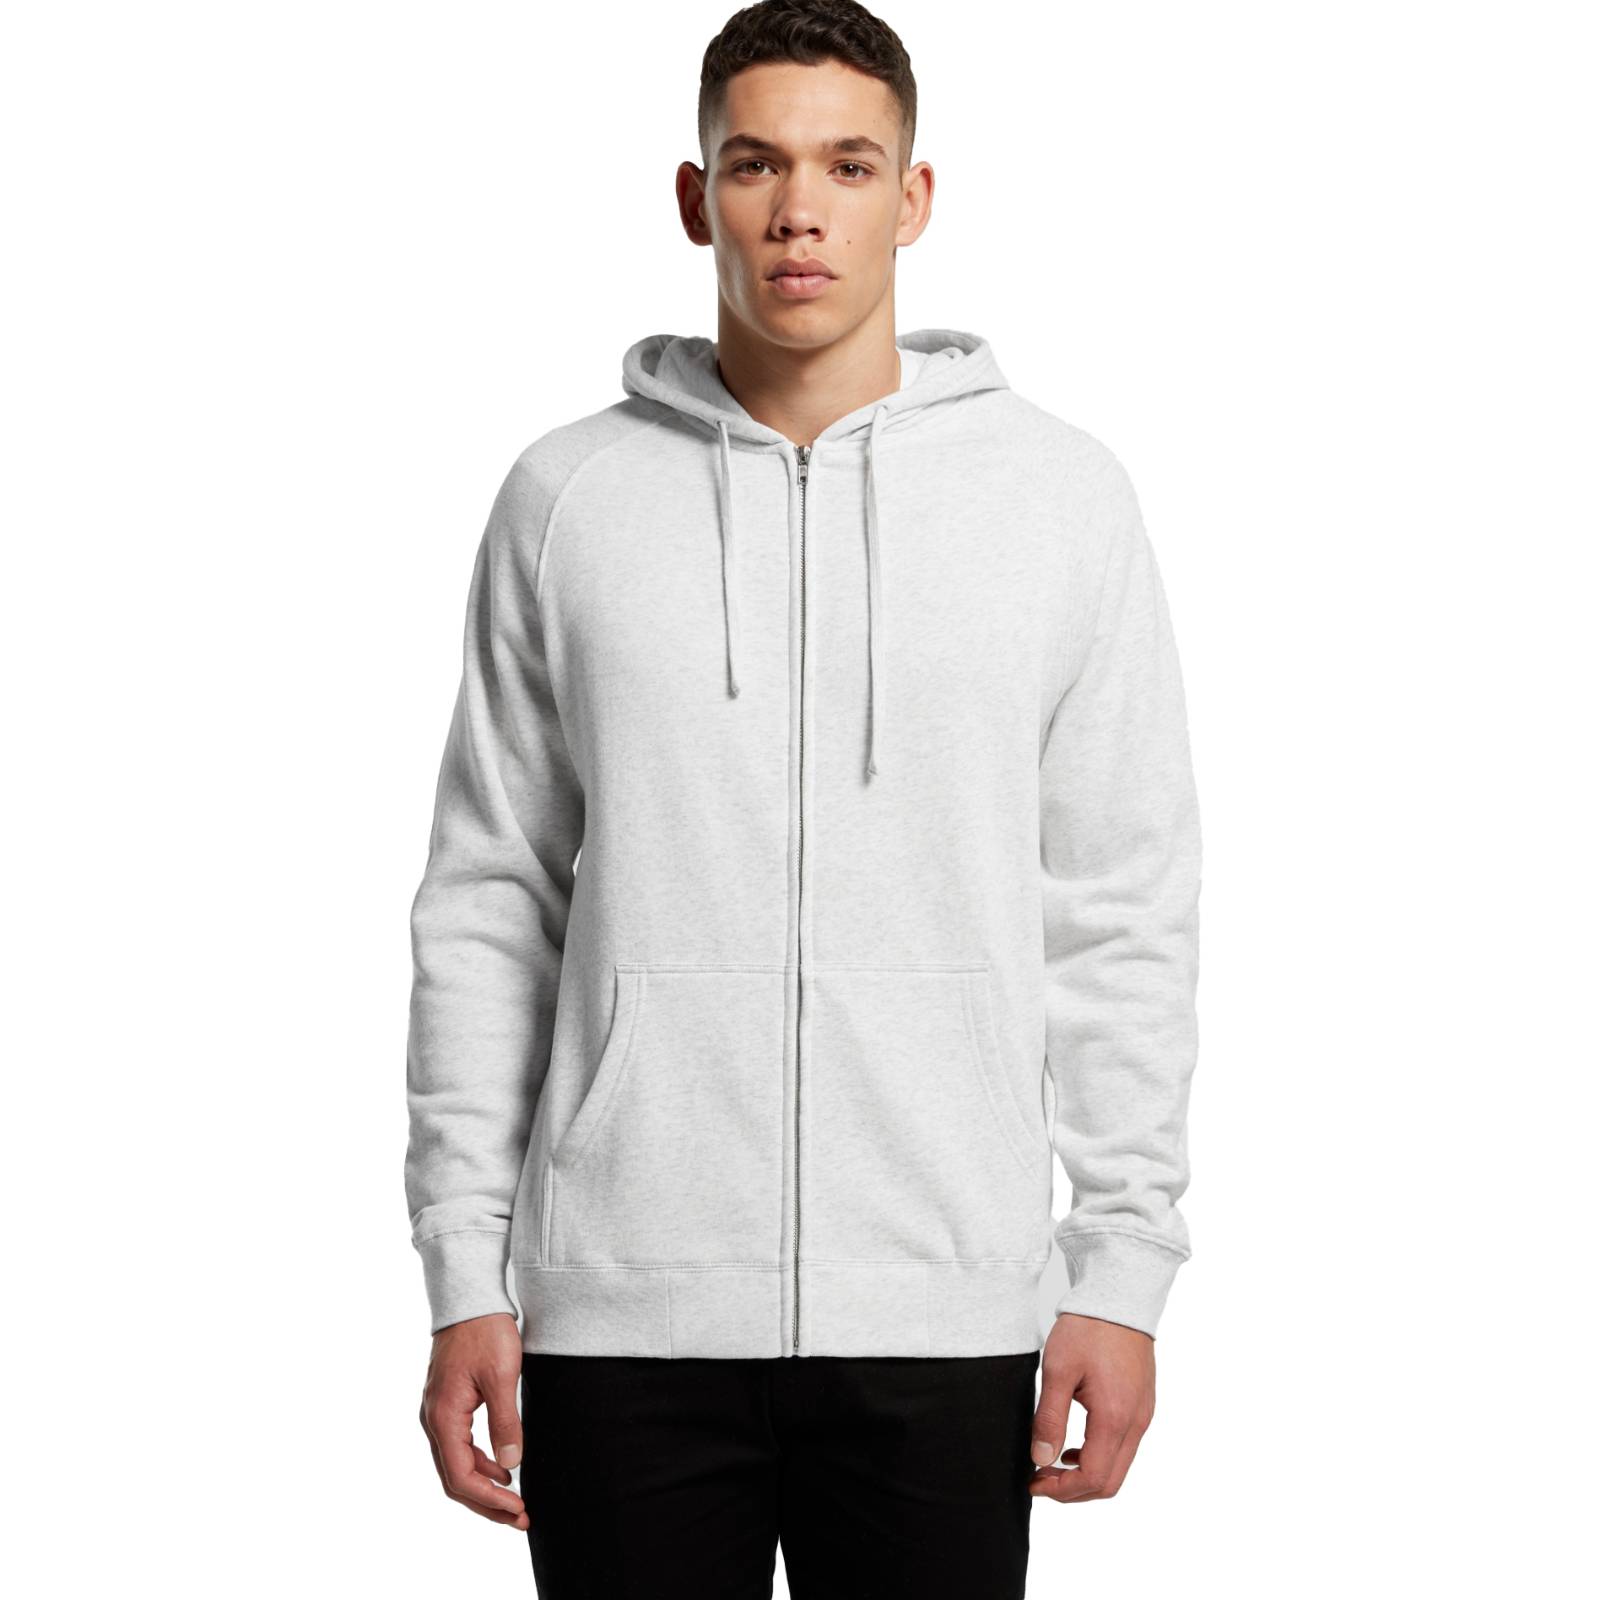 AS Colour Zip Hoodie - Front